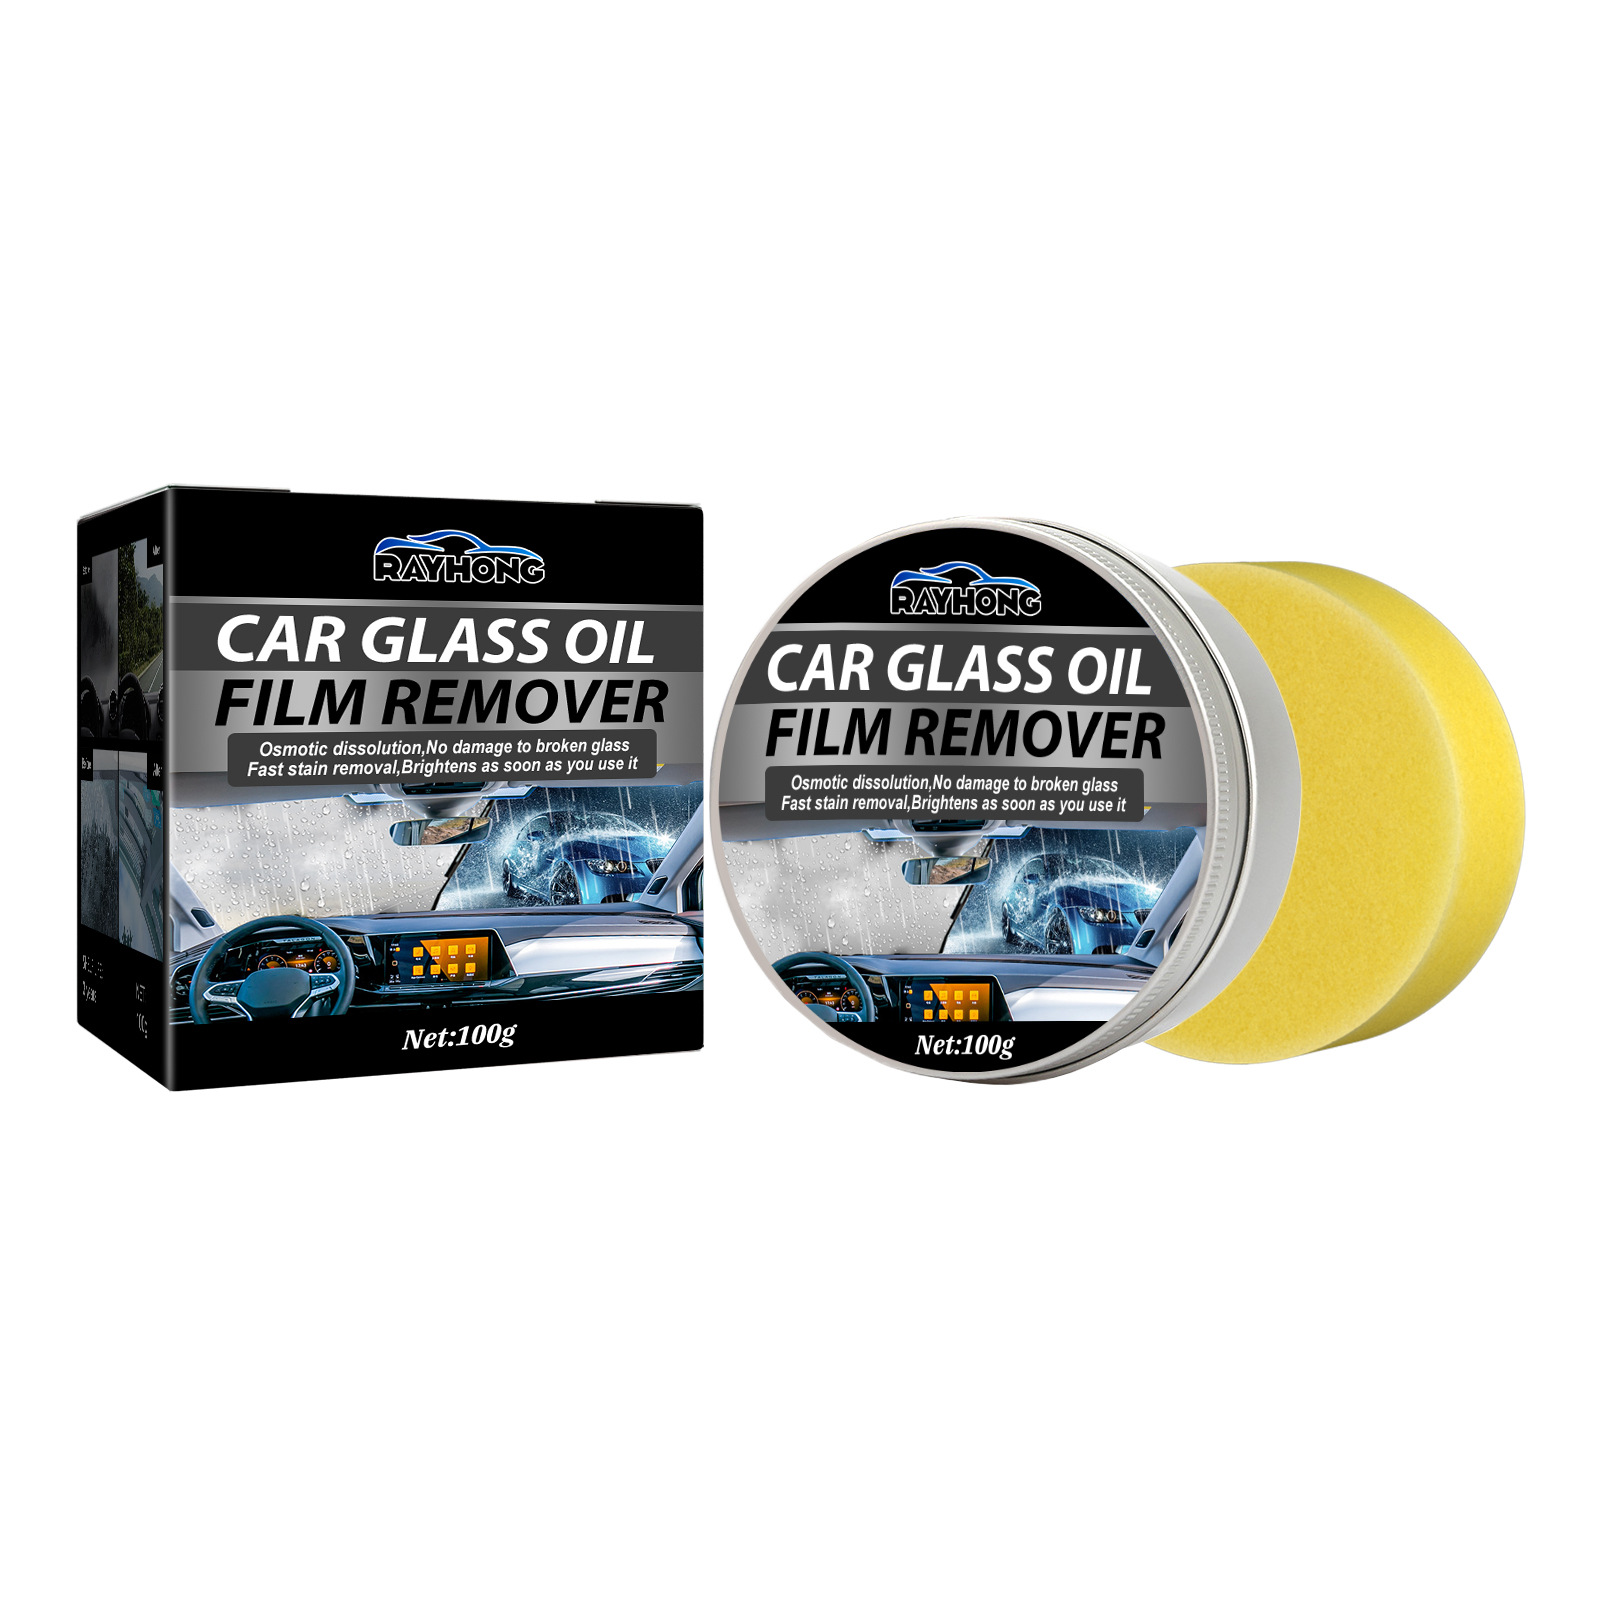 Oil Film Remover Car Glass Polishing Degreaser Cleaner Oil Film Clean  Removing Paste Auto Windshield Window Cleaner 200g